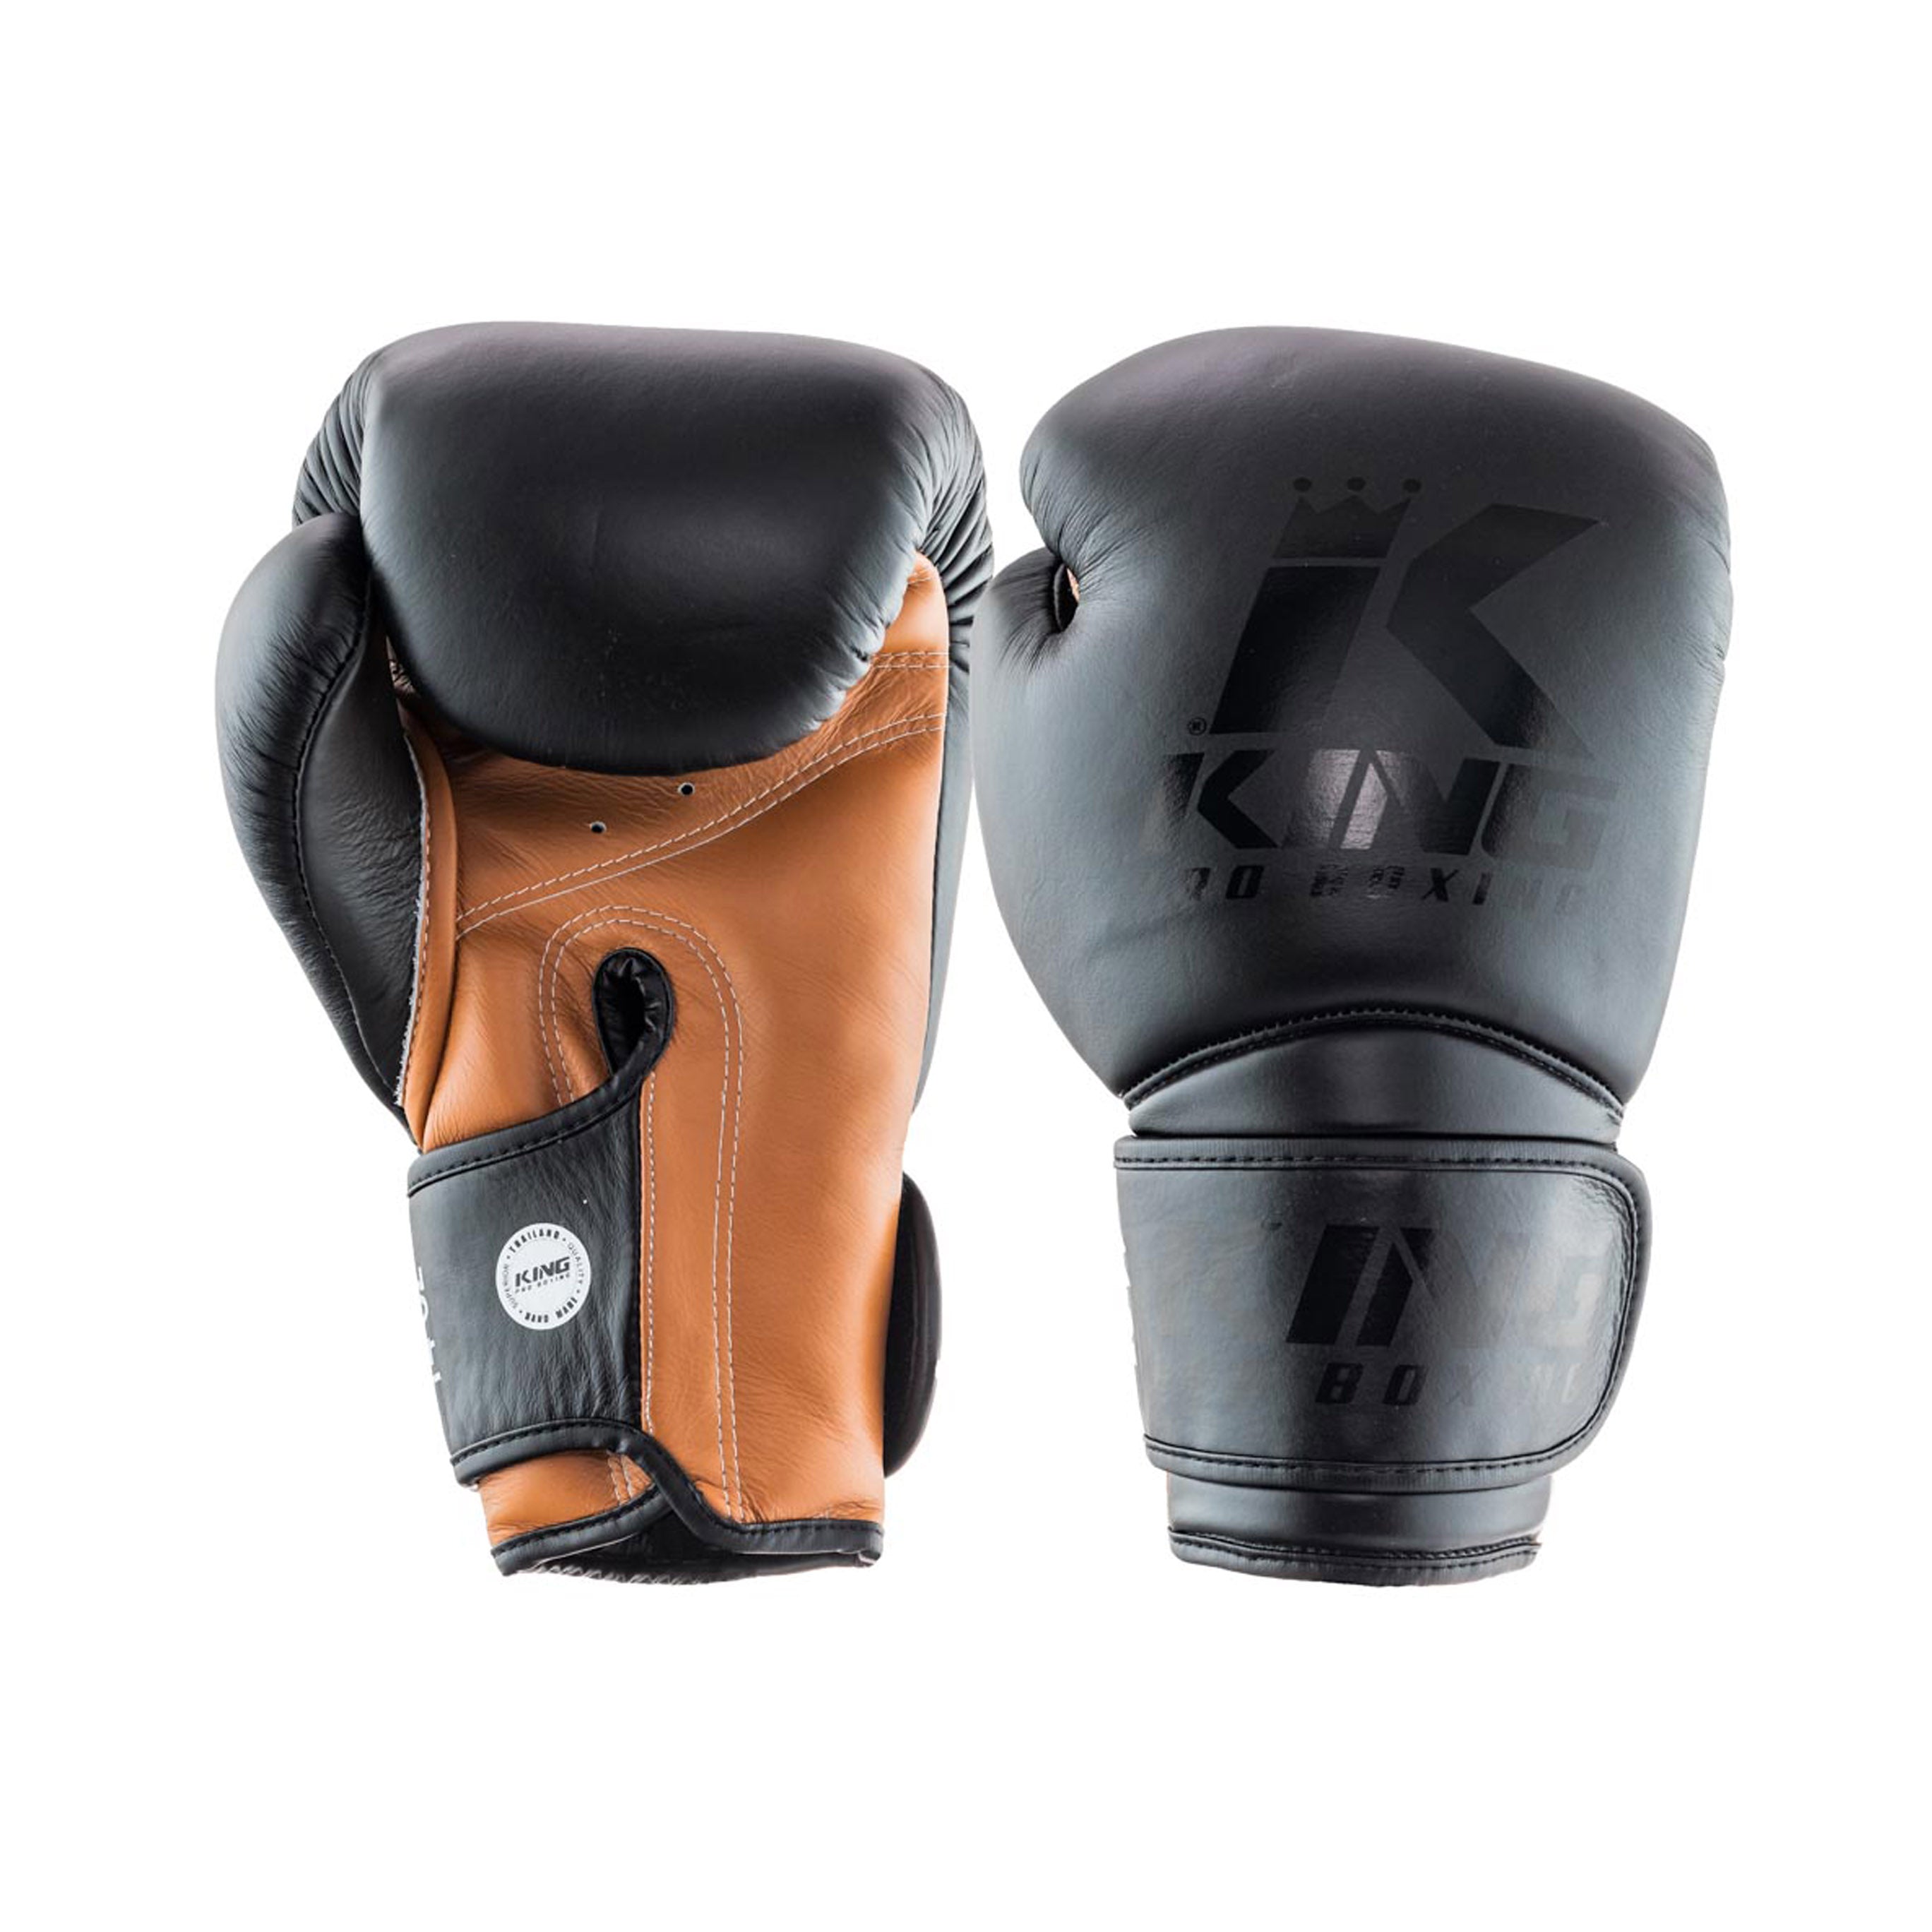 King PRO boxing boxing gloves - STAR 3